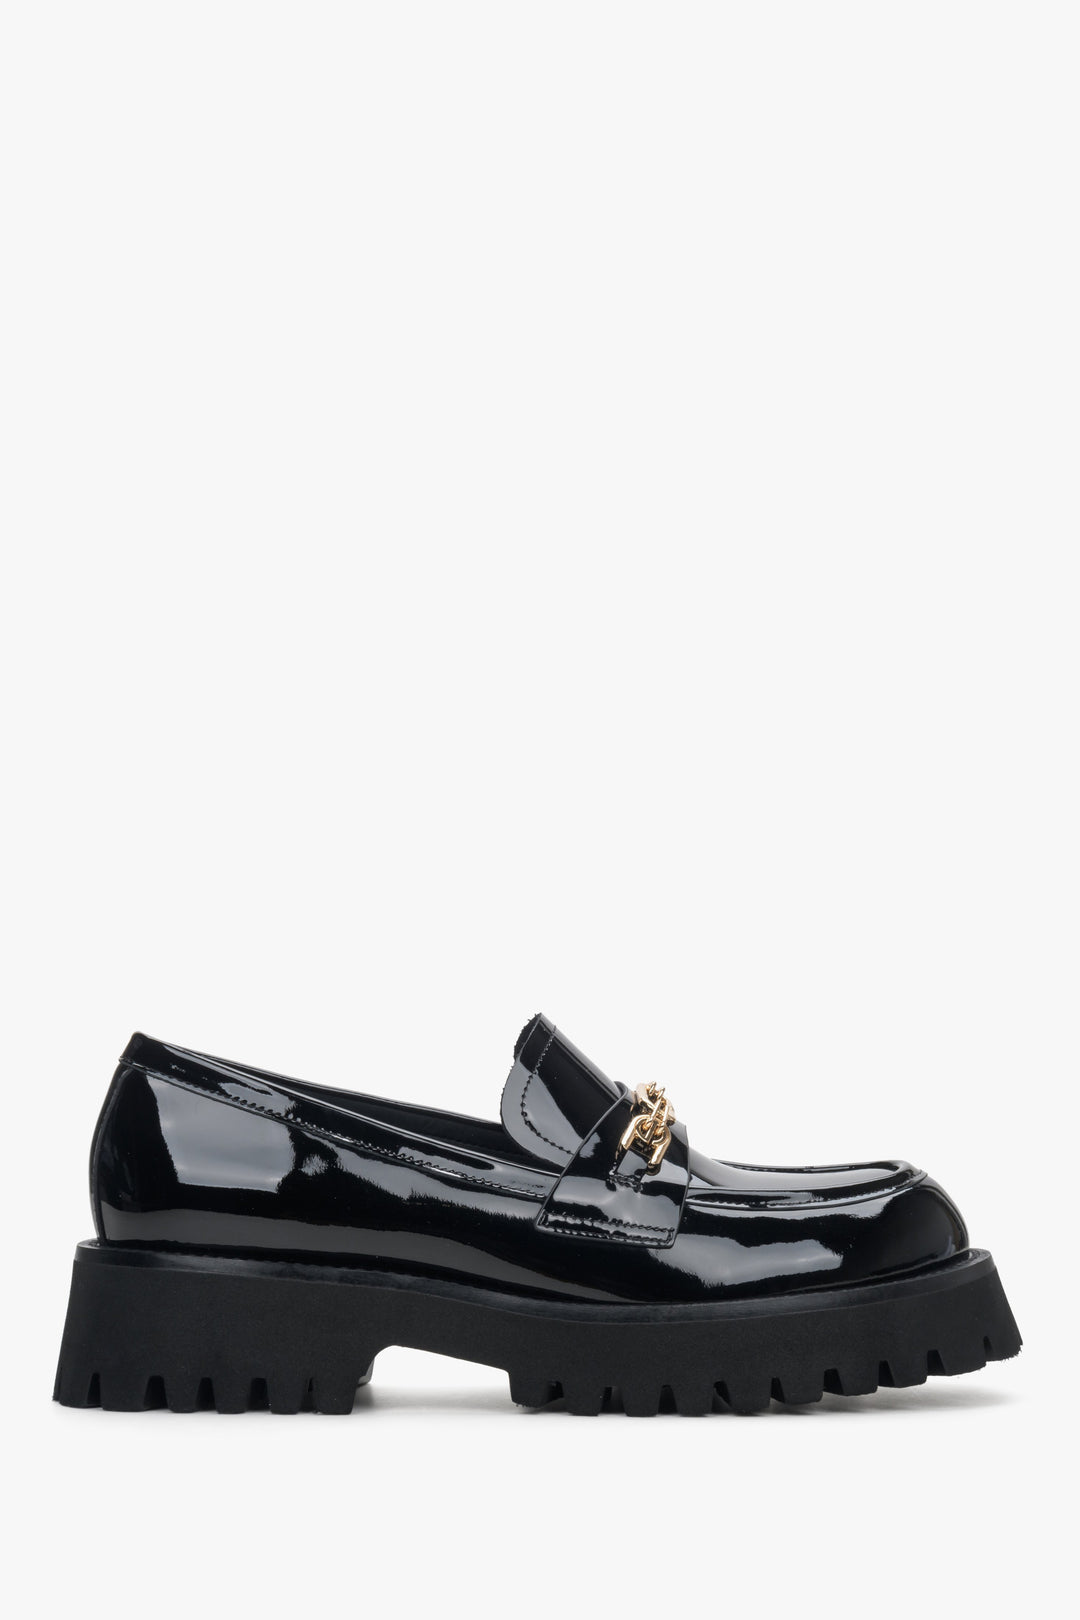 Women's Black Moccasins with Gold Buckle made of Patent Leather Estro ER00114175.